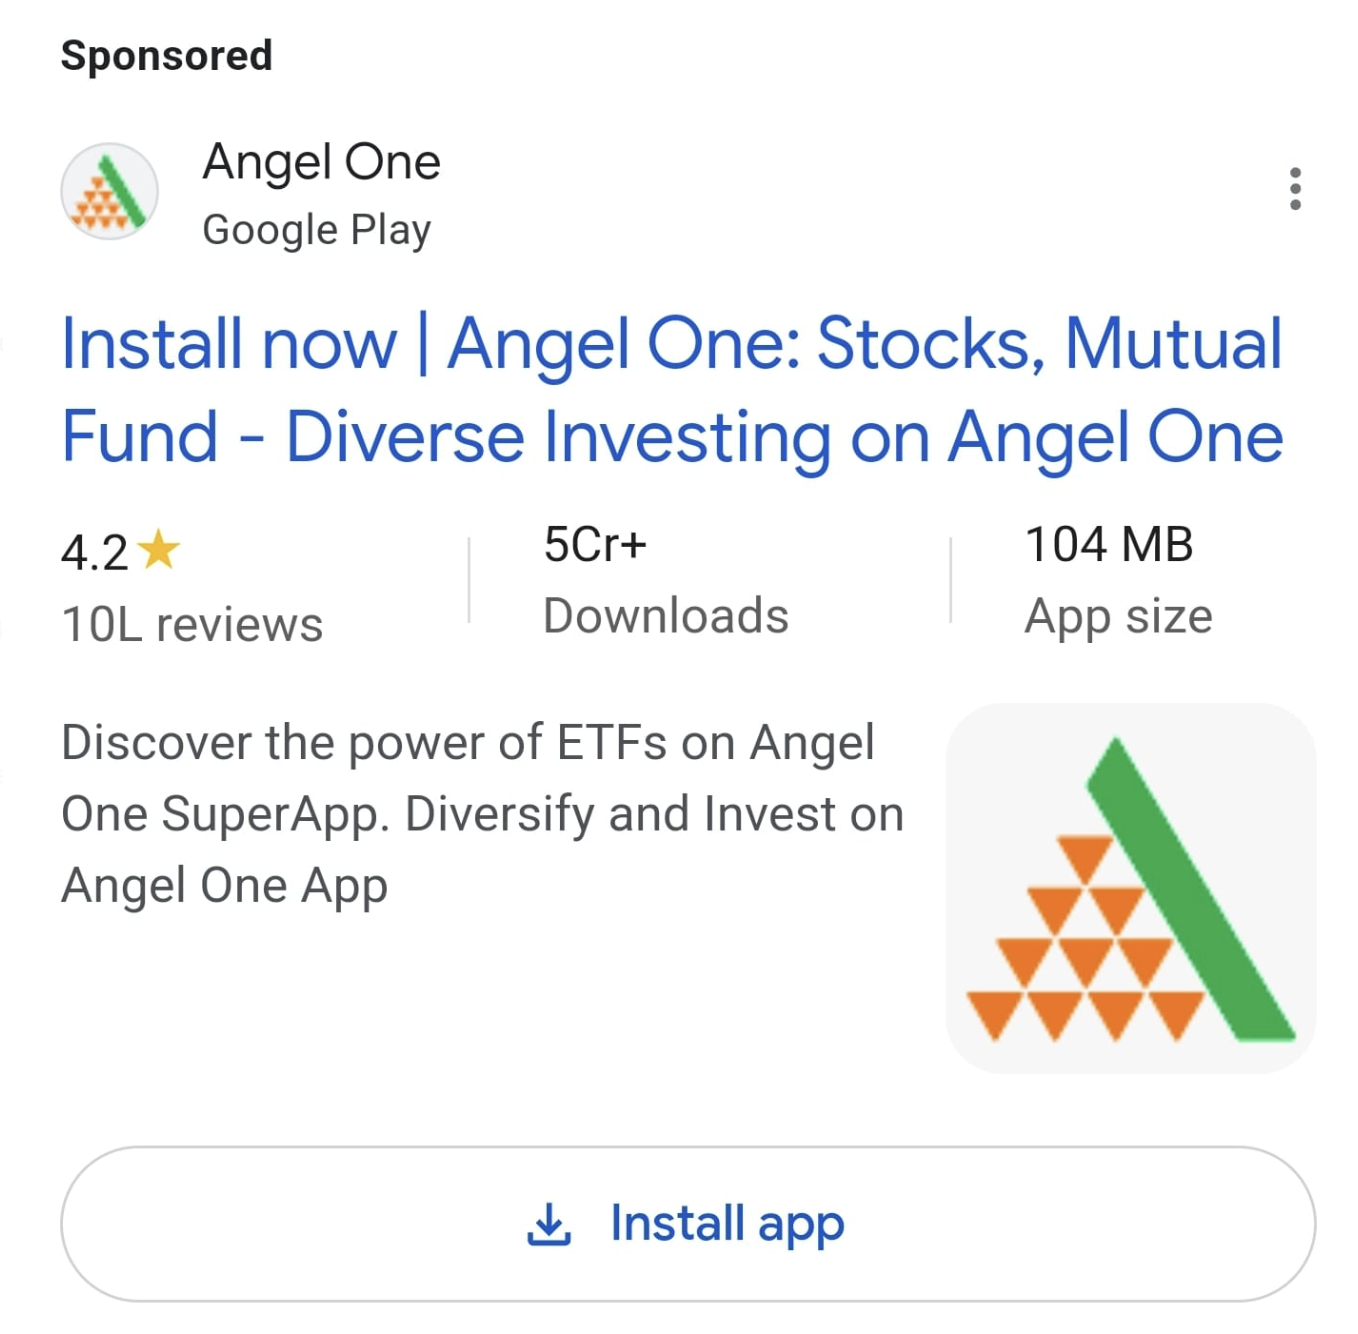 search ad has call to action of install app